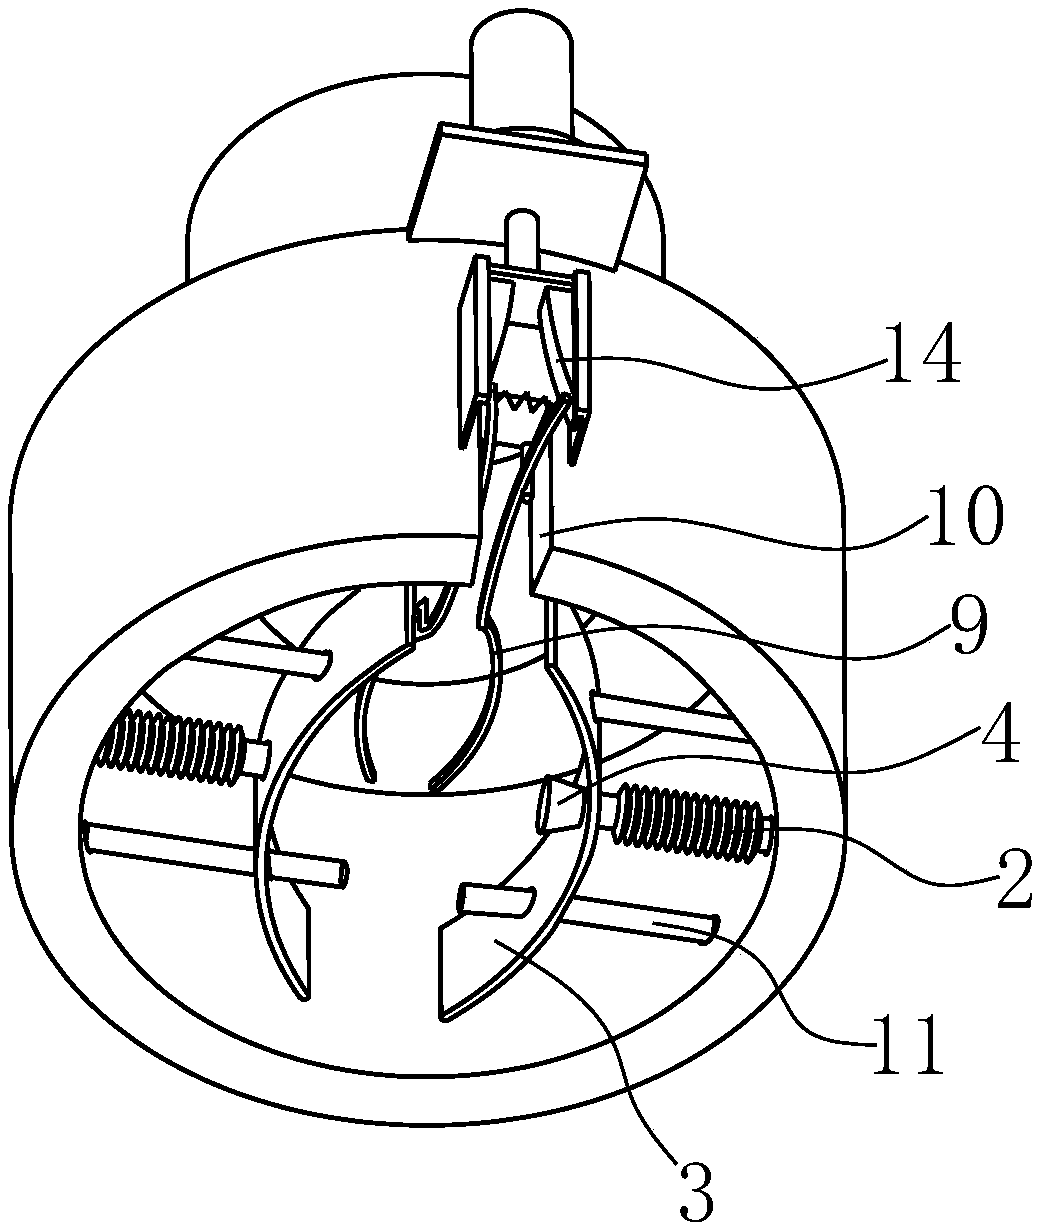 Self-clamping type medicine discharging device and use method thereof